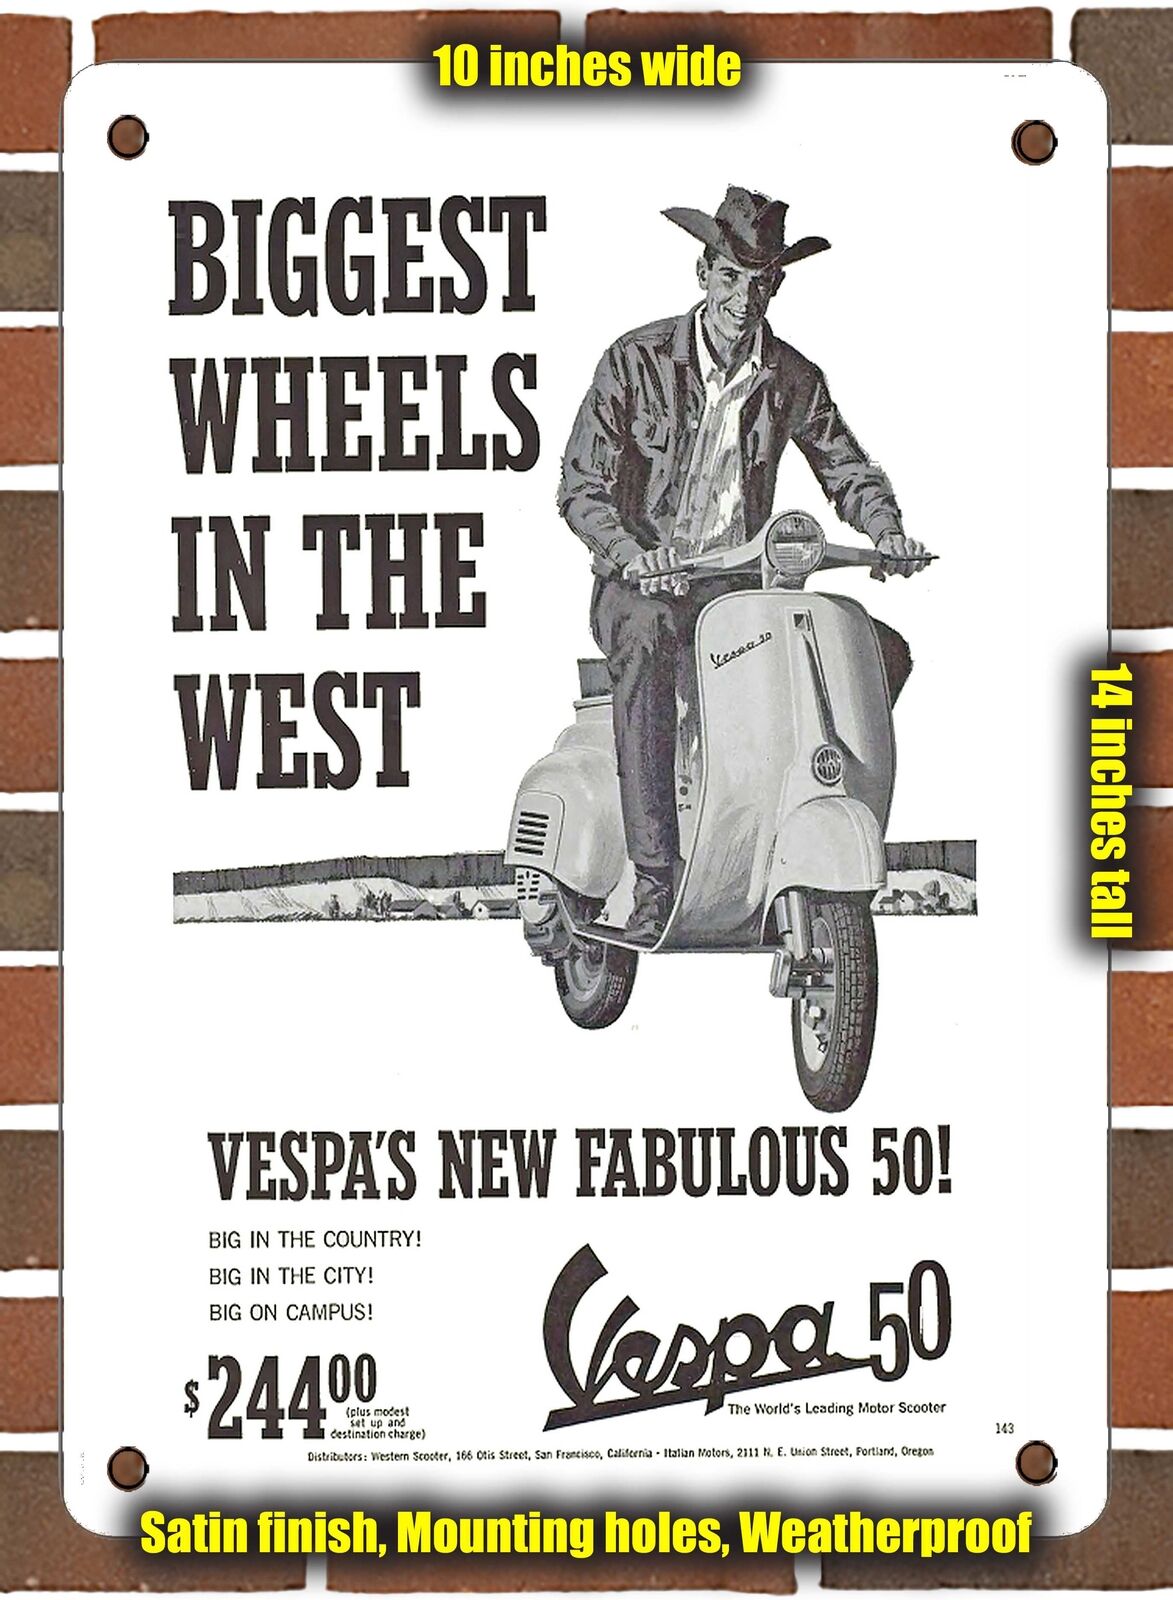 METAL SIGN - 1964 Vespa 50 Biggest Wheels in the West 2 - 10x14 Inches